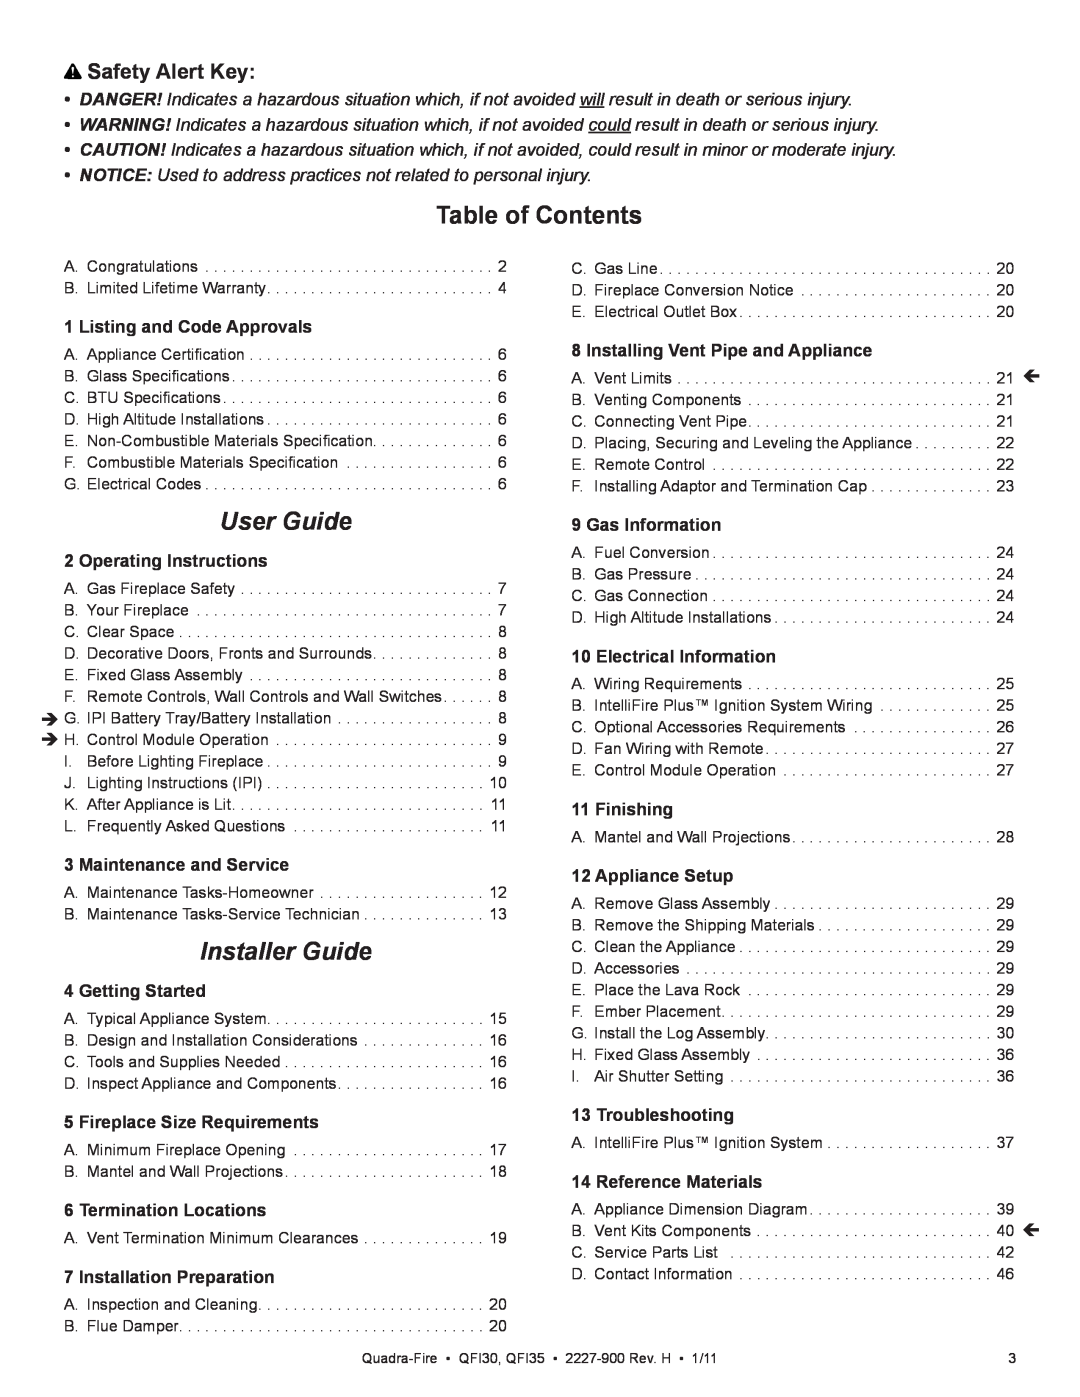 Quadra-Fire QF130 owner manual Table of Contents, Safety Alert Key, User Guide, Installer Guide 